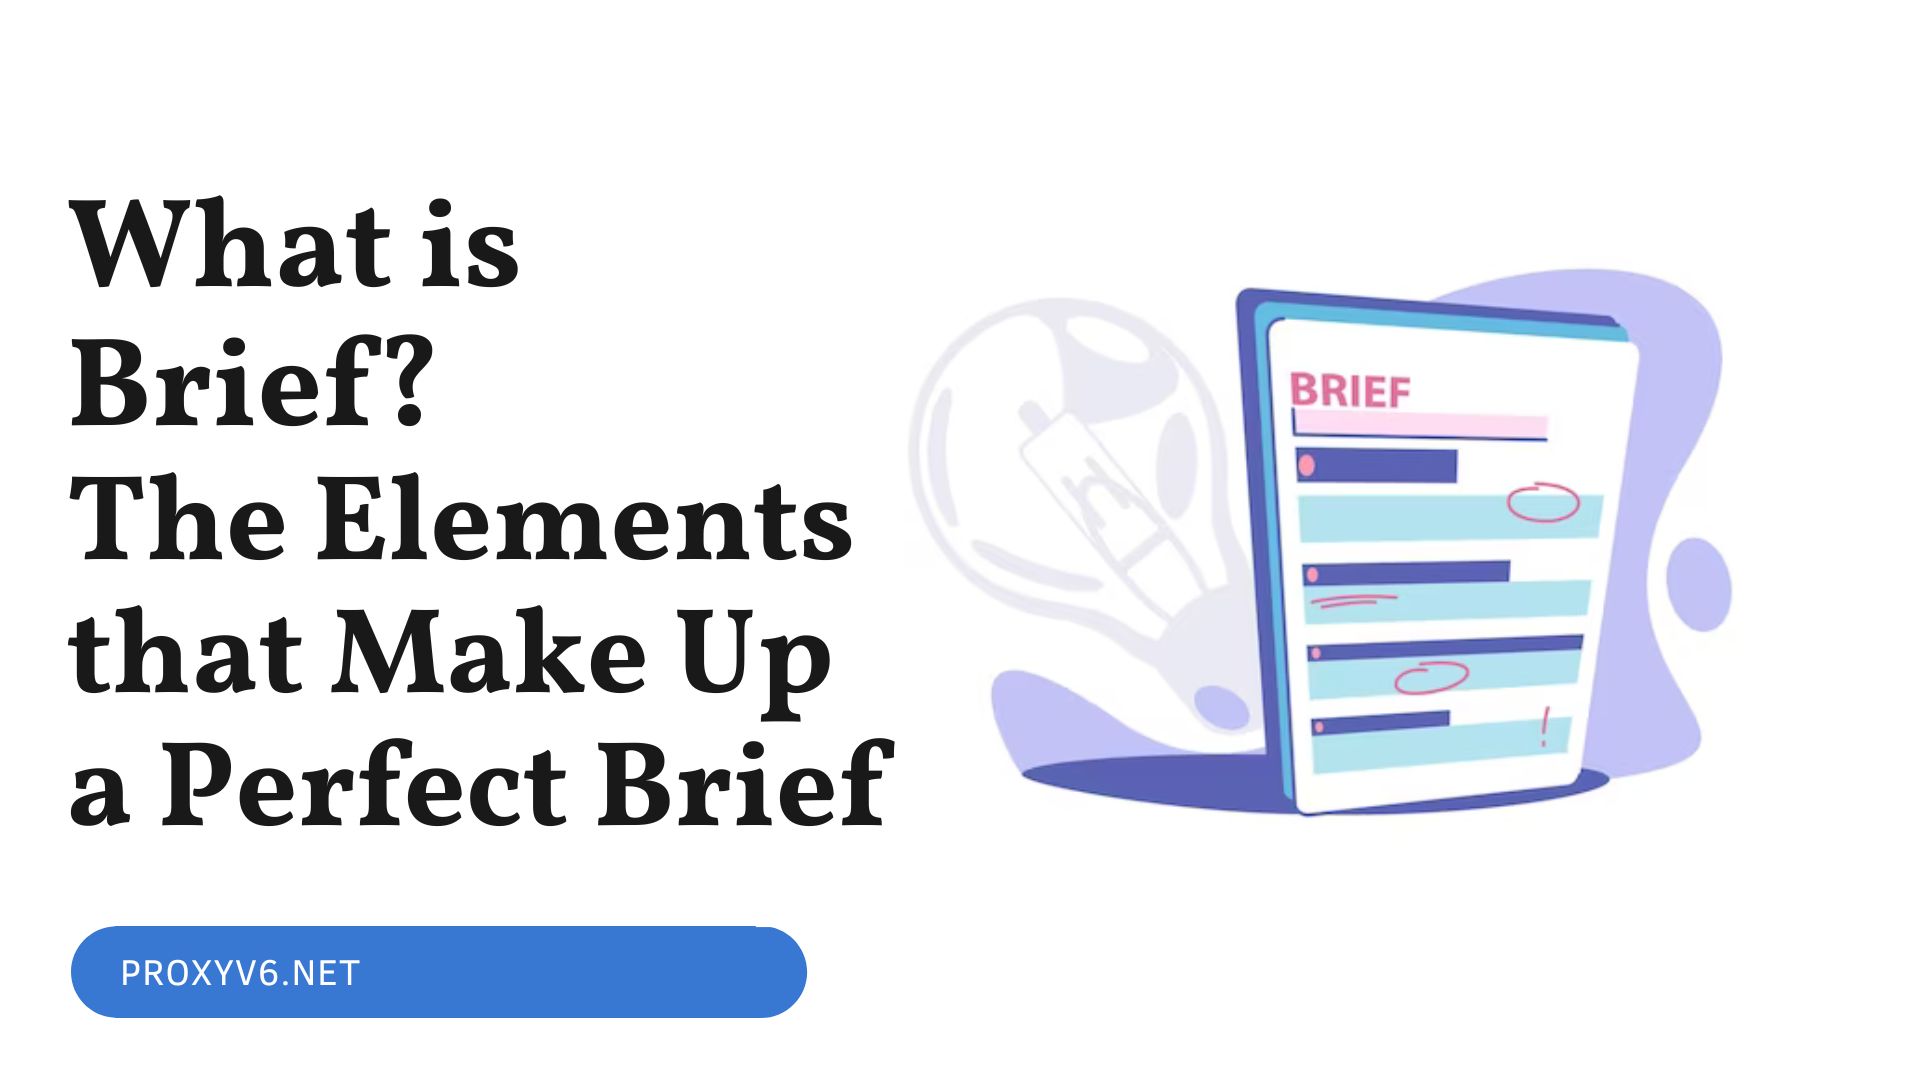 What is Brief? The Elements that Make Up a Perfect Brief